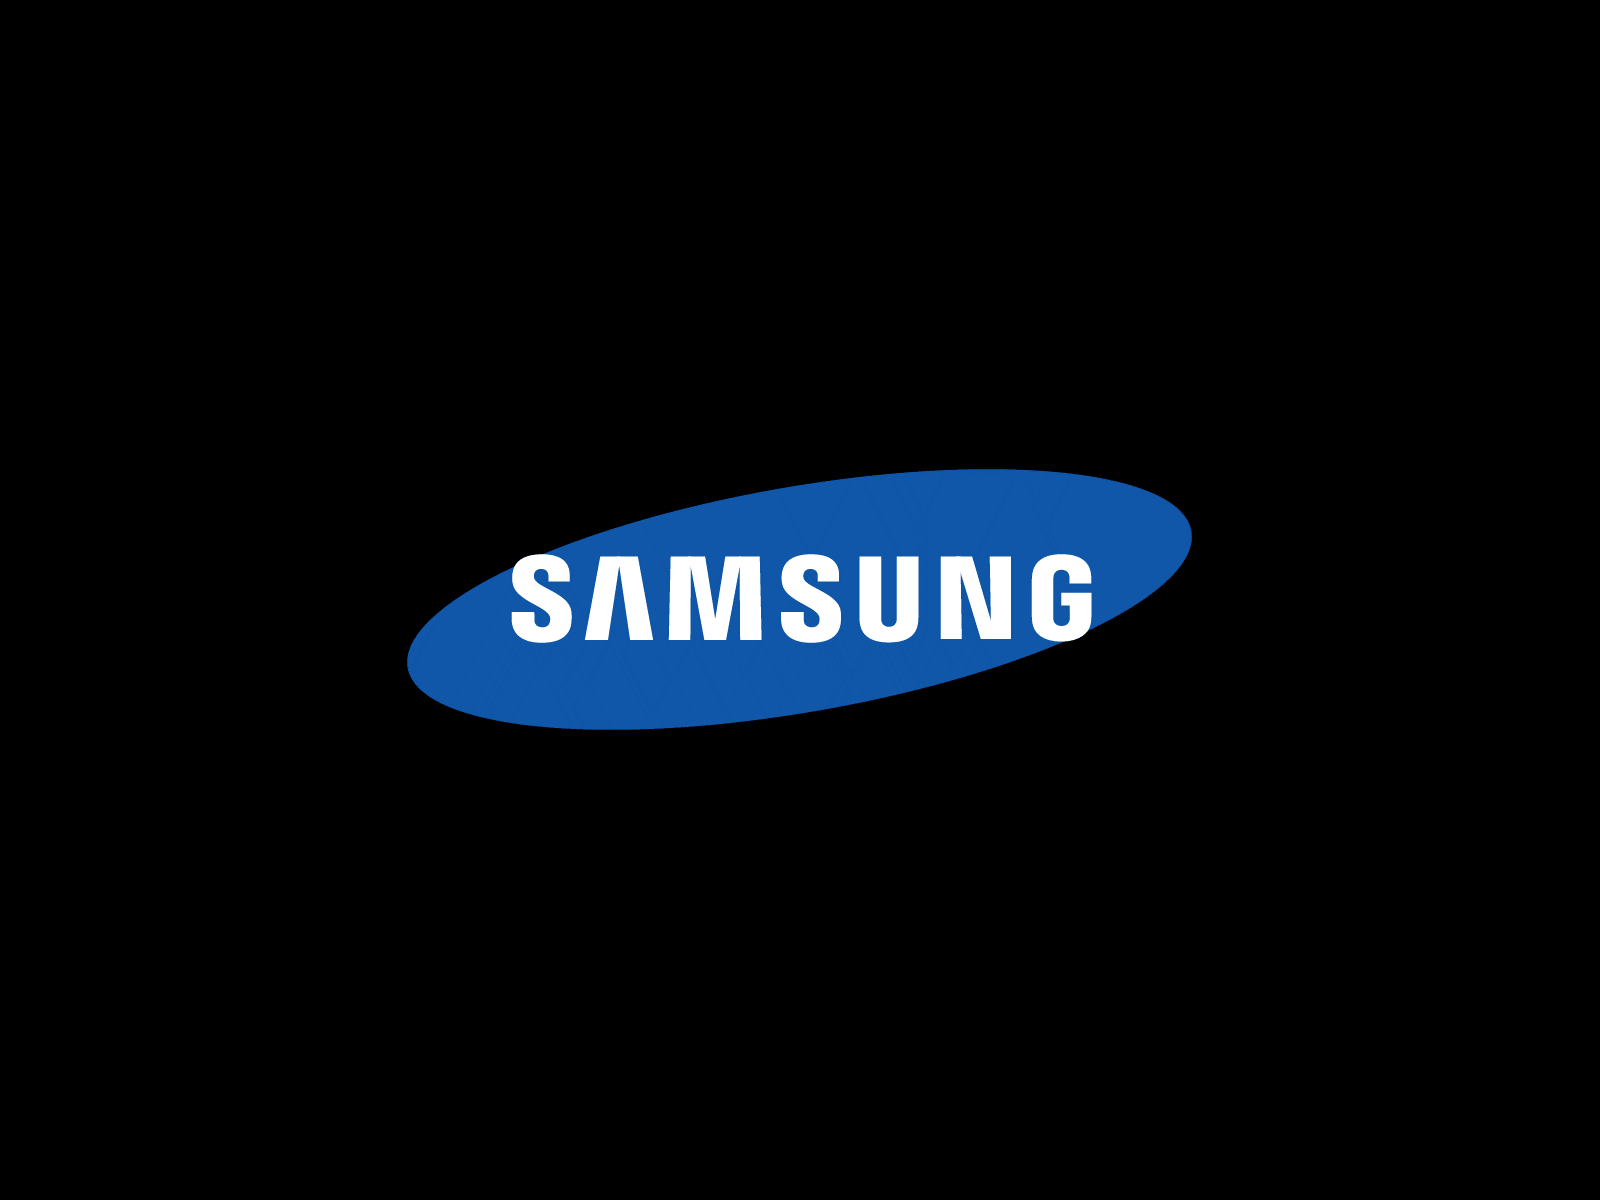 Samsung Logo Animation by Quang Nguyen on Dribbble